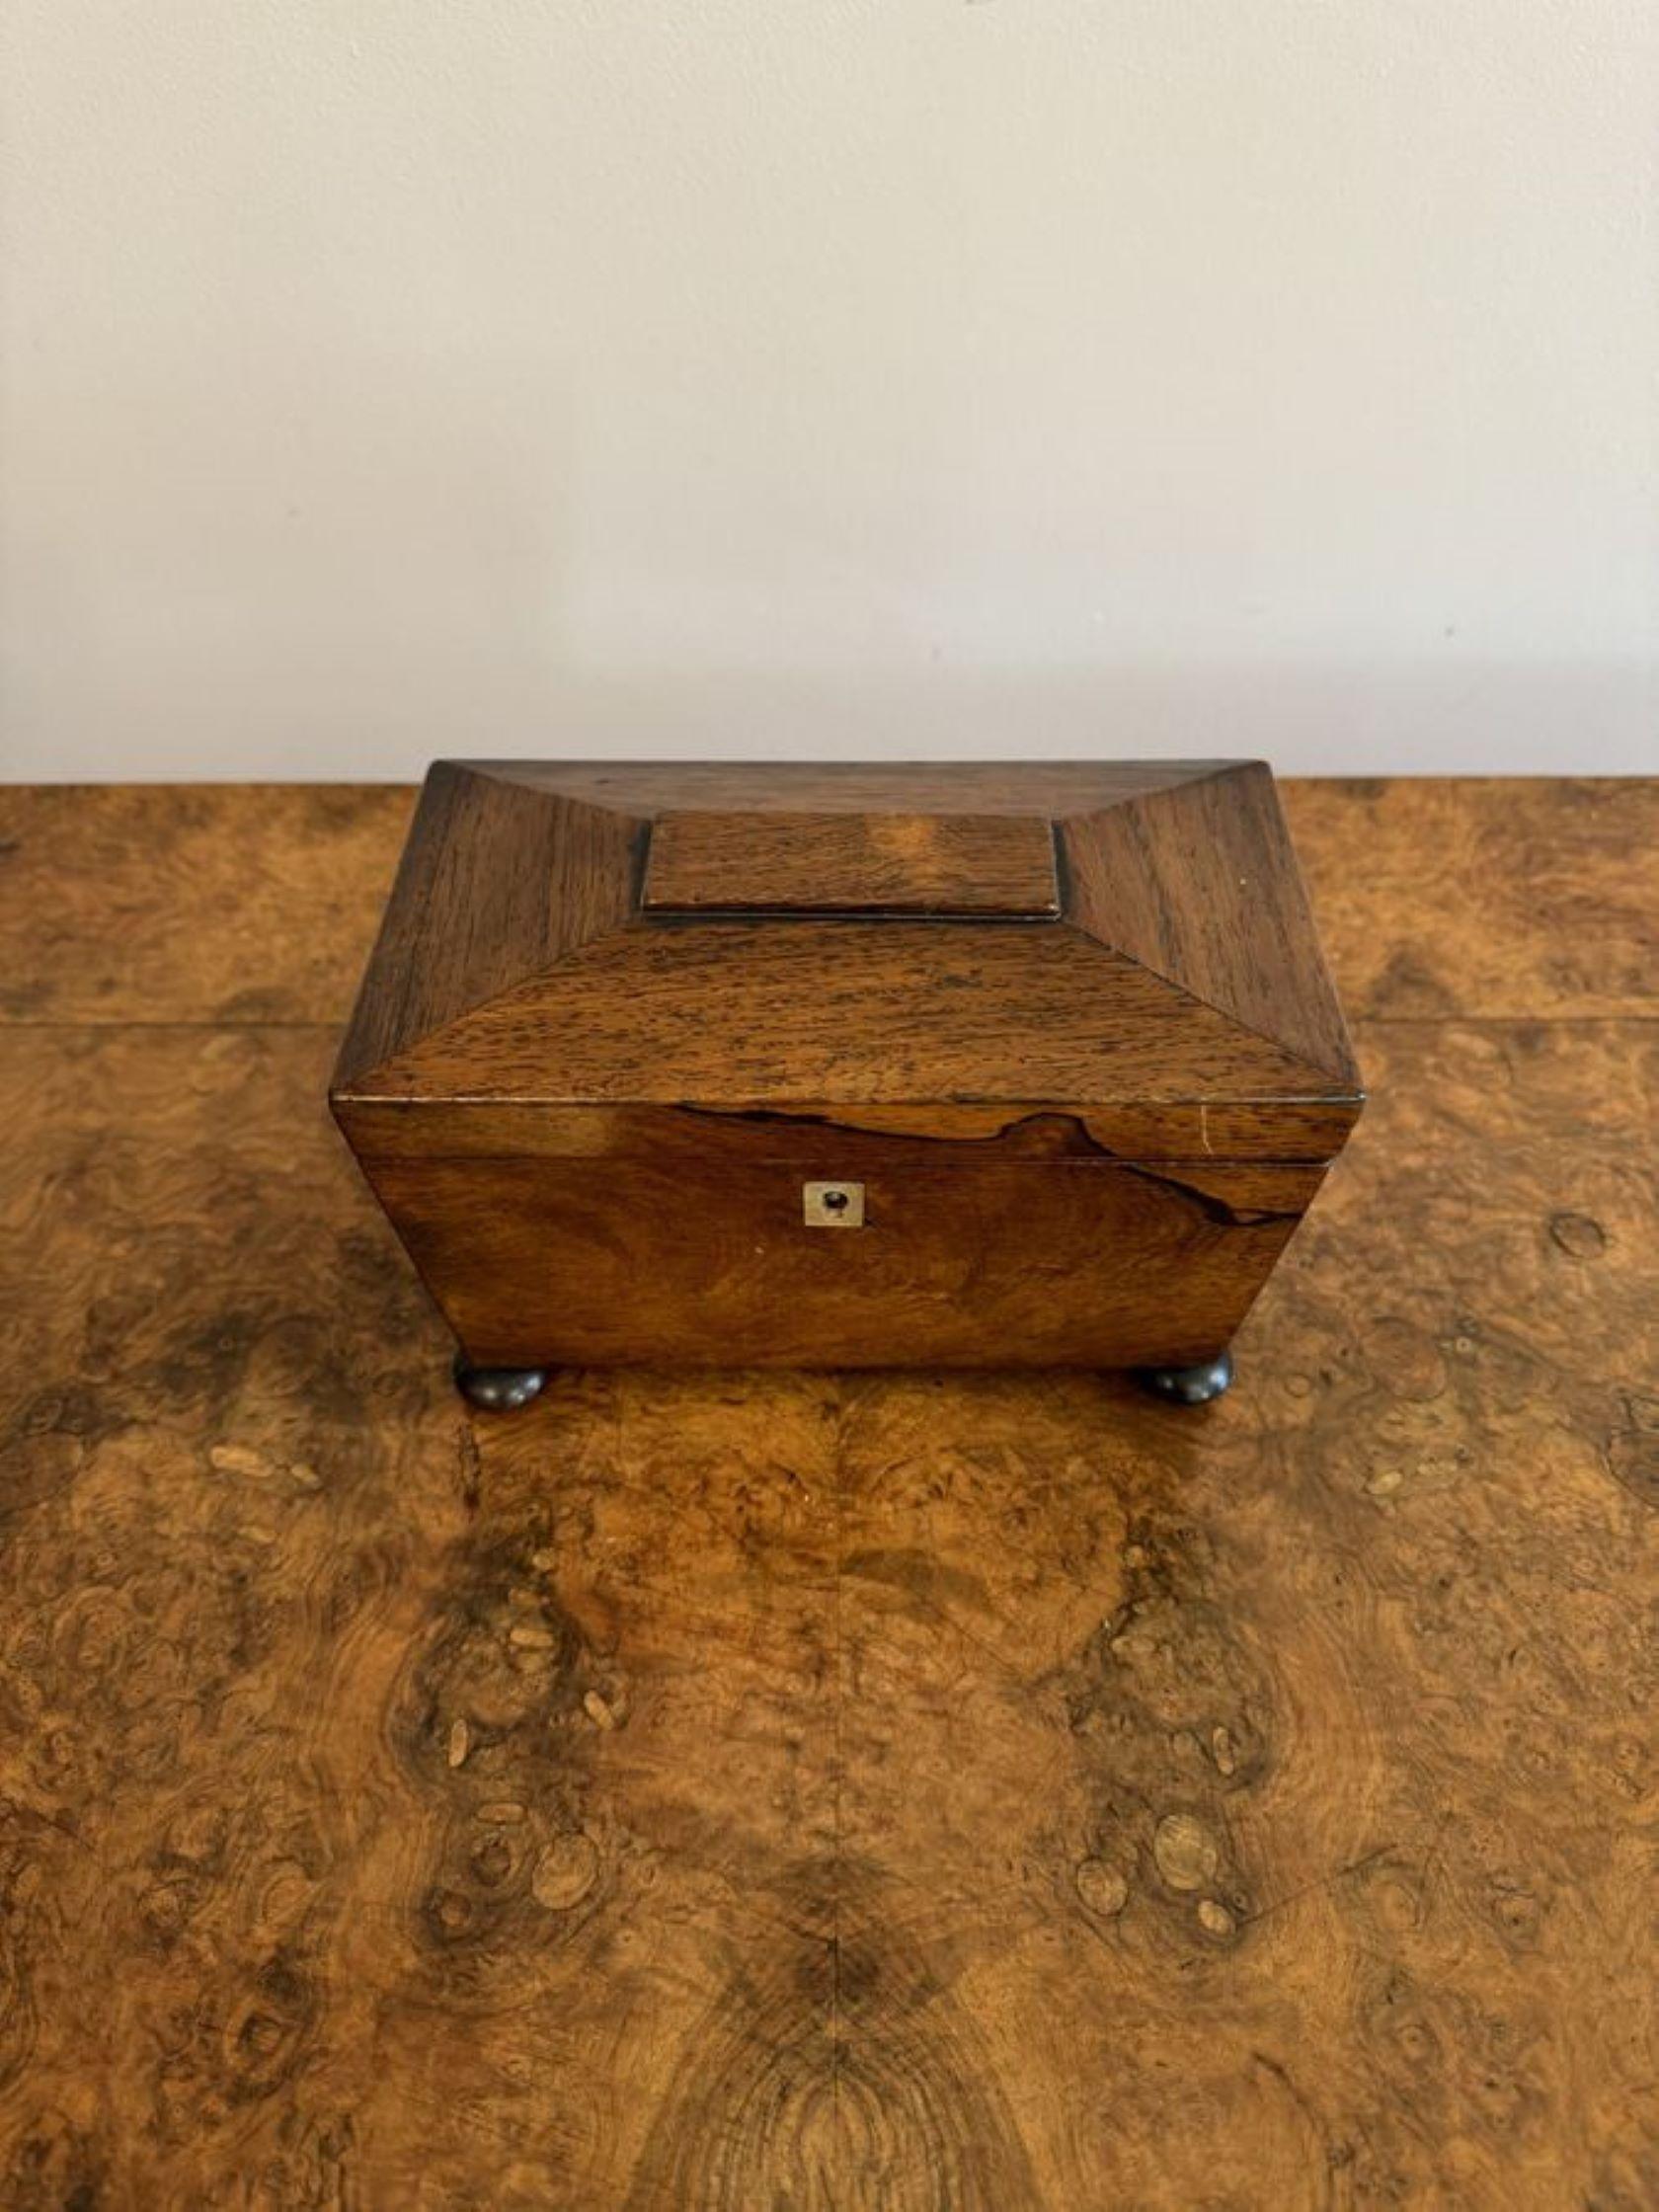 Lovely antique Victorian rosewood tea caddy, having a quality rosewood tea caddy with a lift up lid opening to reveal two compartments with removable lids for tea, raised on the original bun feet.

D. 1880